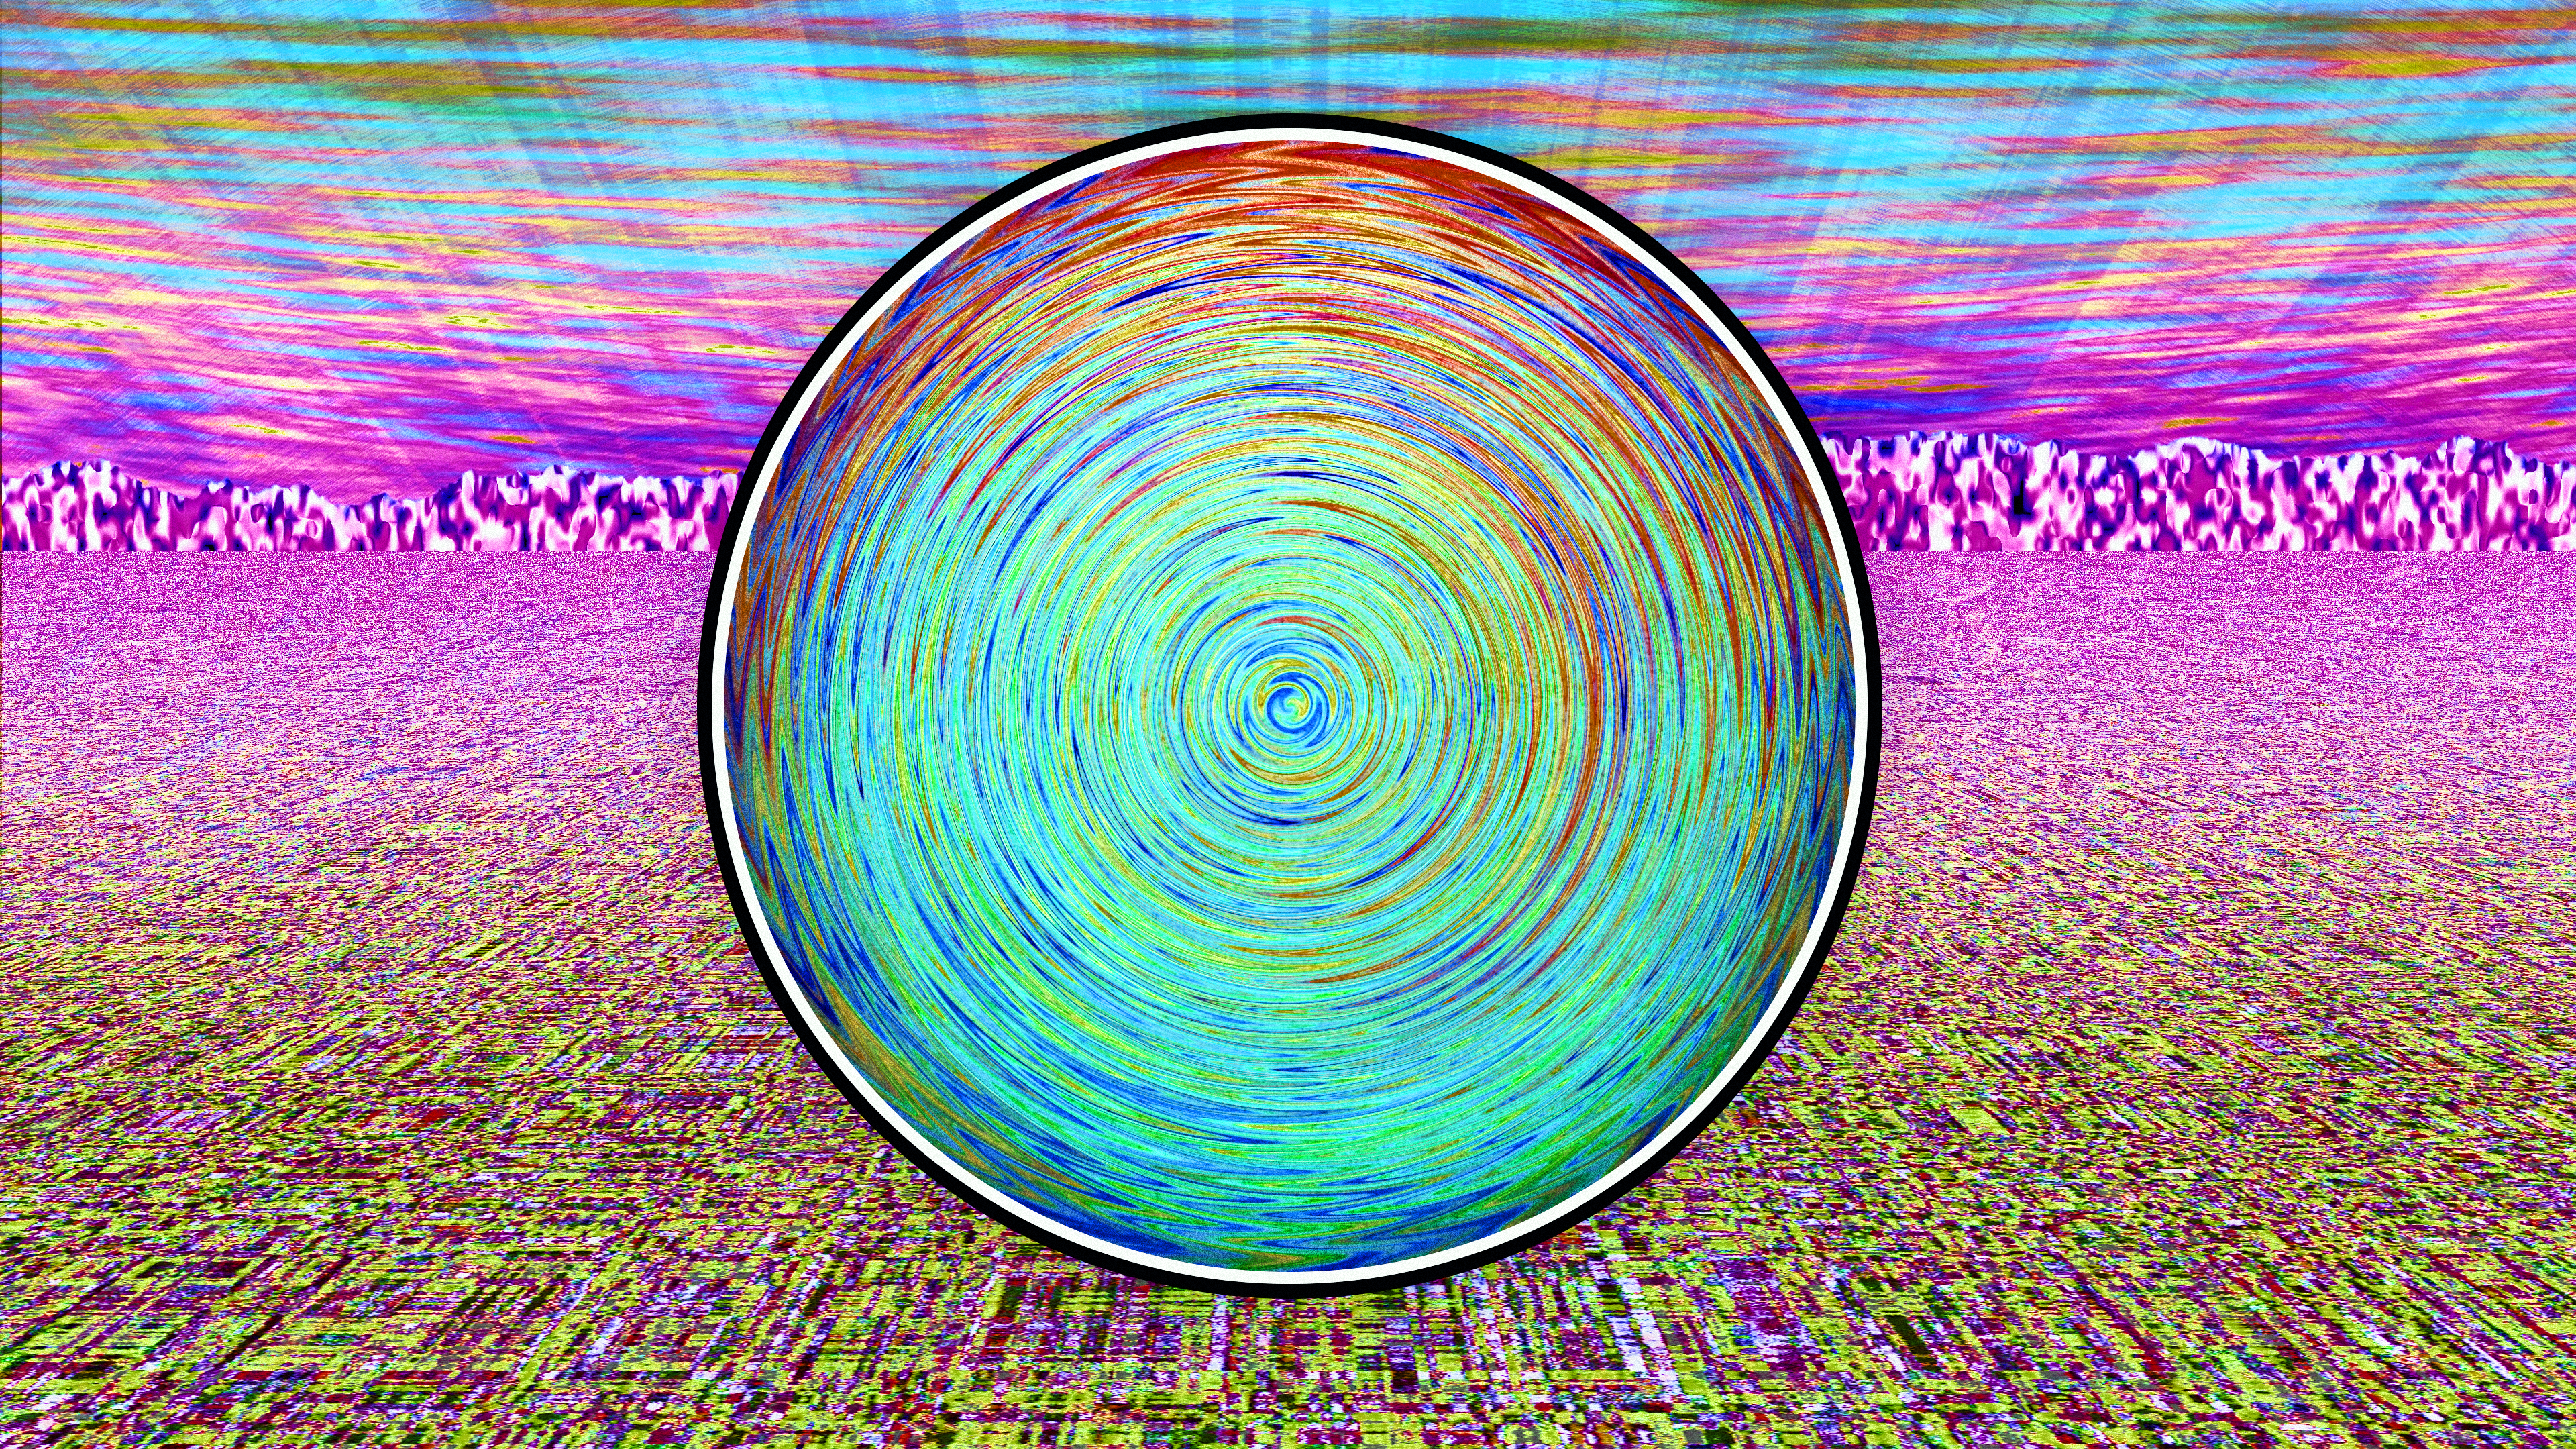 General 3840x2160 noise circle vaporwave glitch art abstract